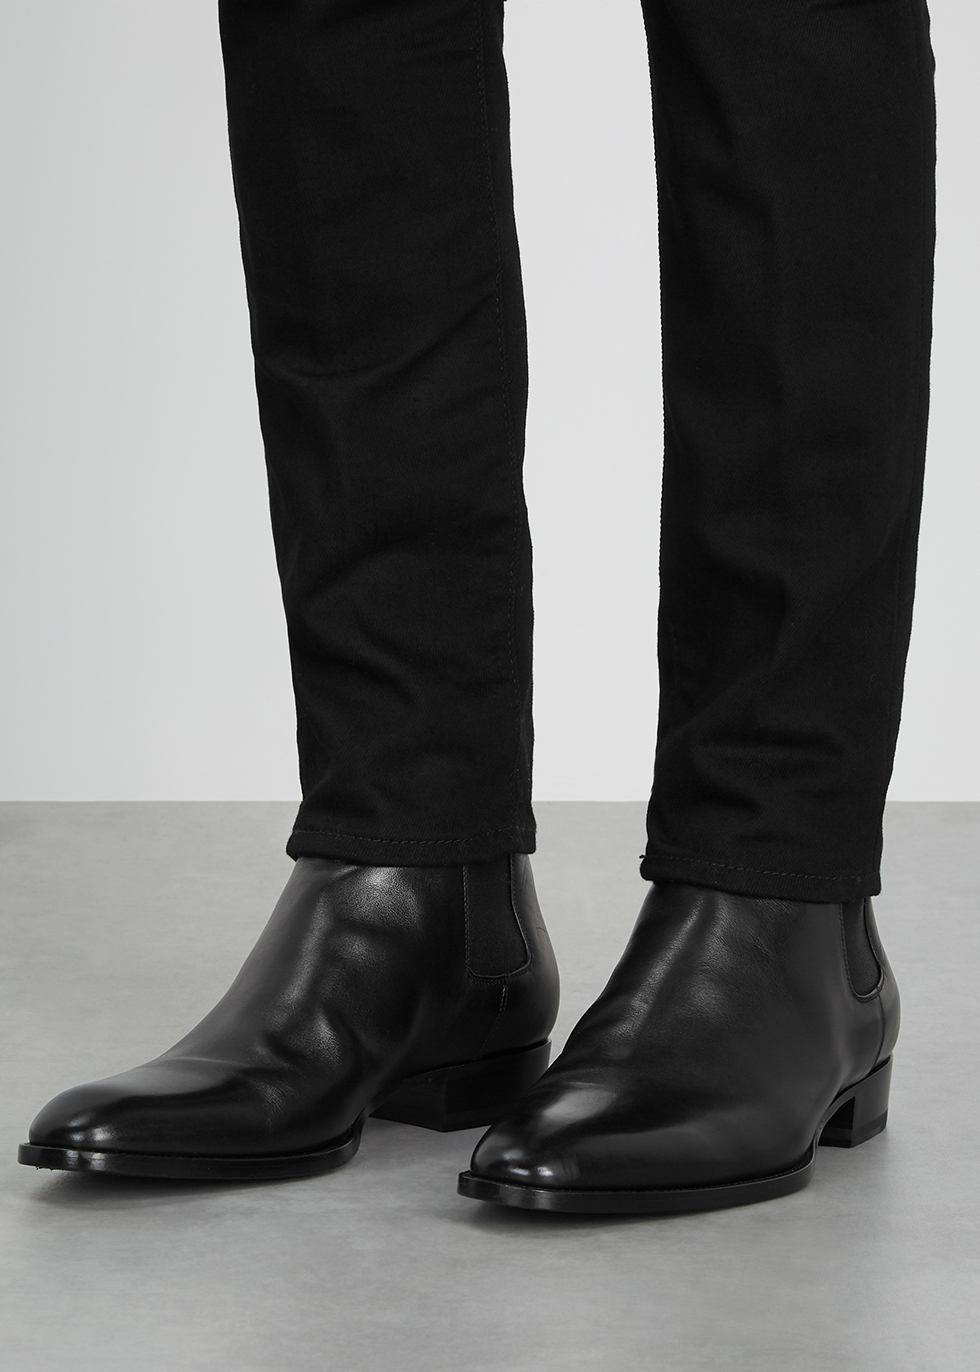 wyatt chelsea boot in smooth leather